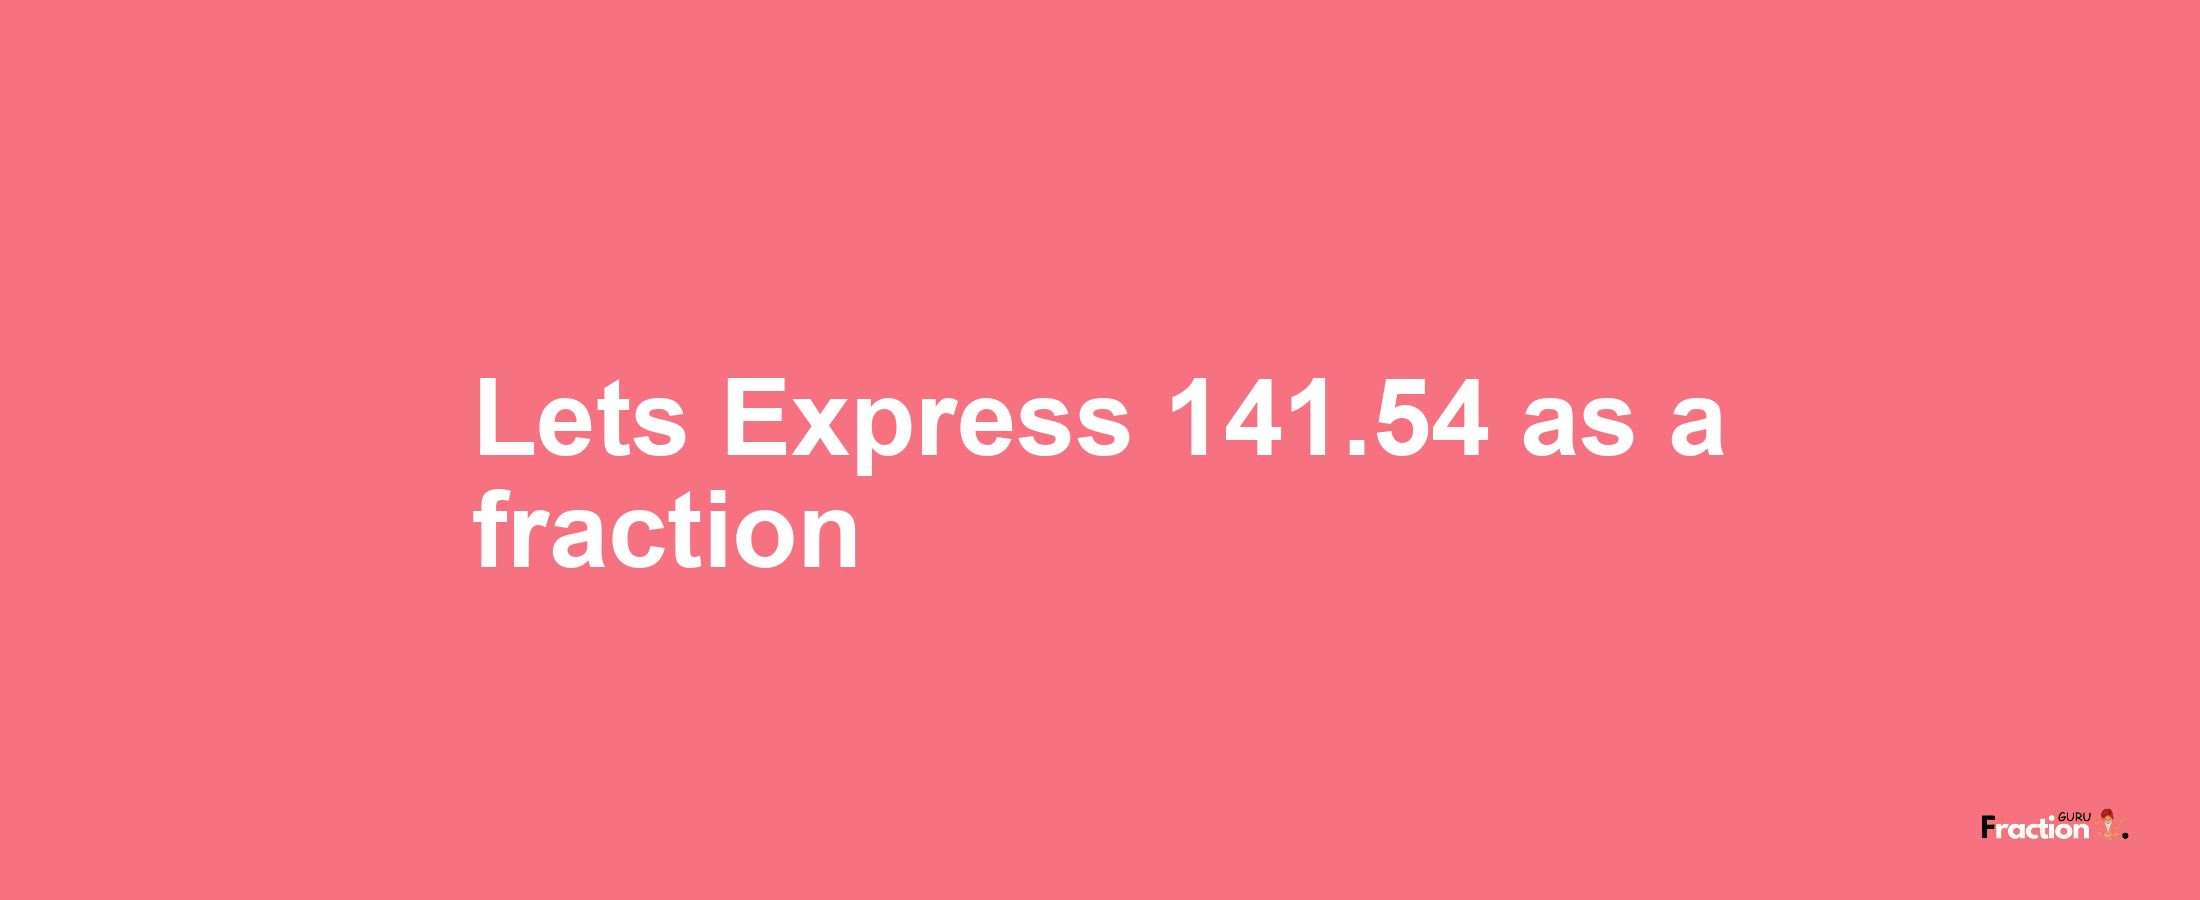 Lets Express 141.54 as afraction